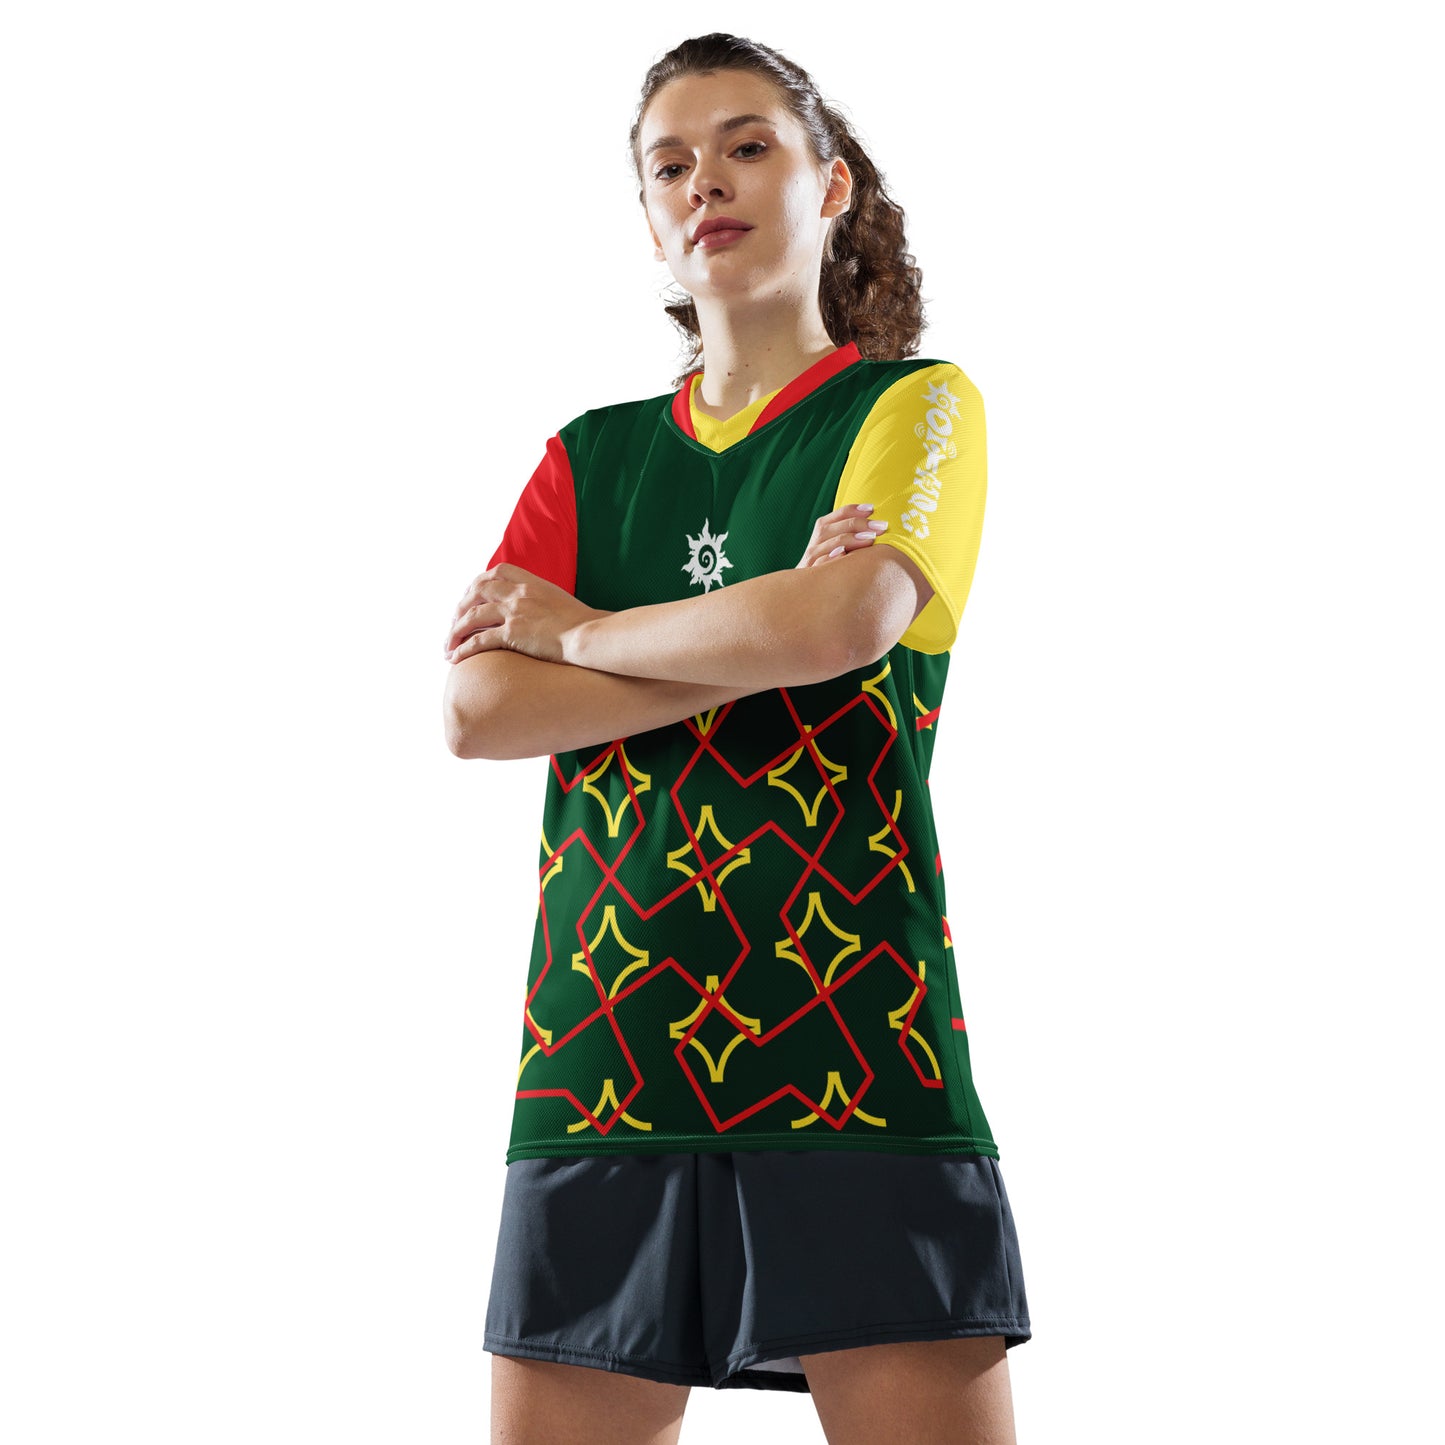 Recycled Unisex Sports Jersey ActSun 10